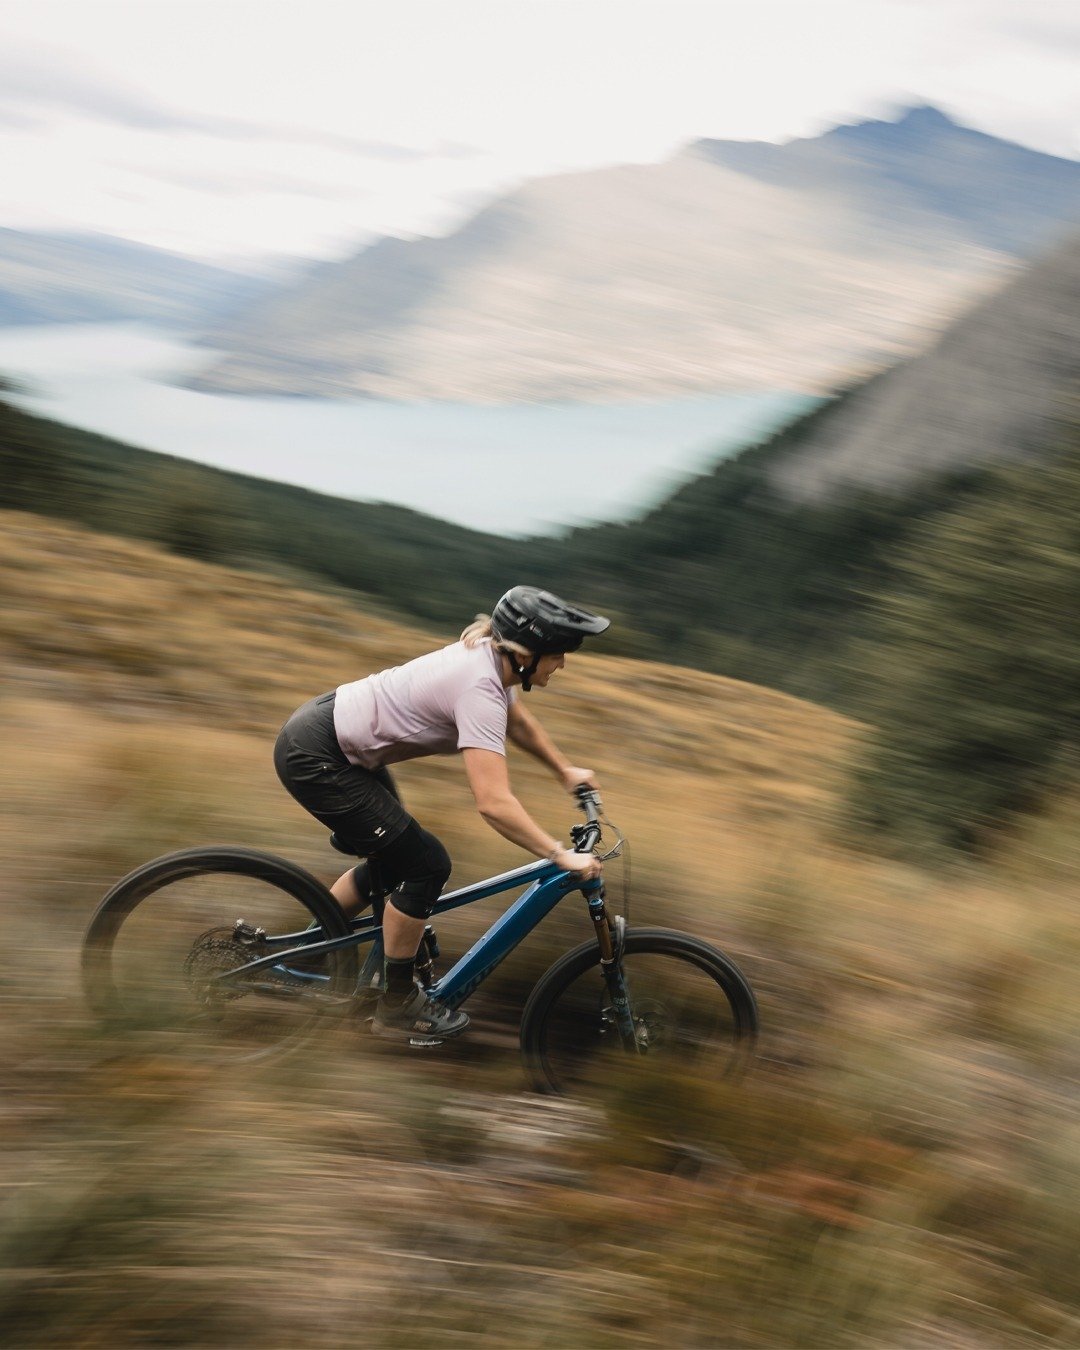 Get ready for an exhilarating journey as the Shuttle LT redefines your cycling experience, promising one more lap, or ten more laps of pure excitement. 

#pivotcycles #pivotshuttlelt #shimanomtb